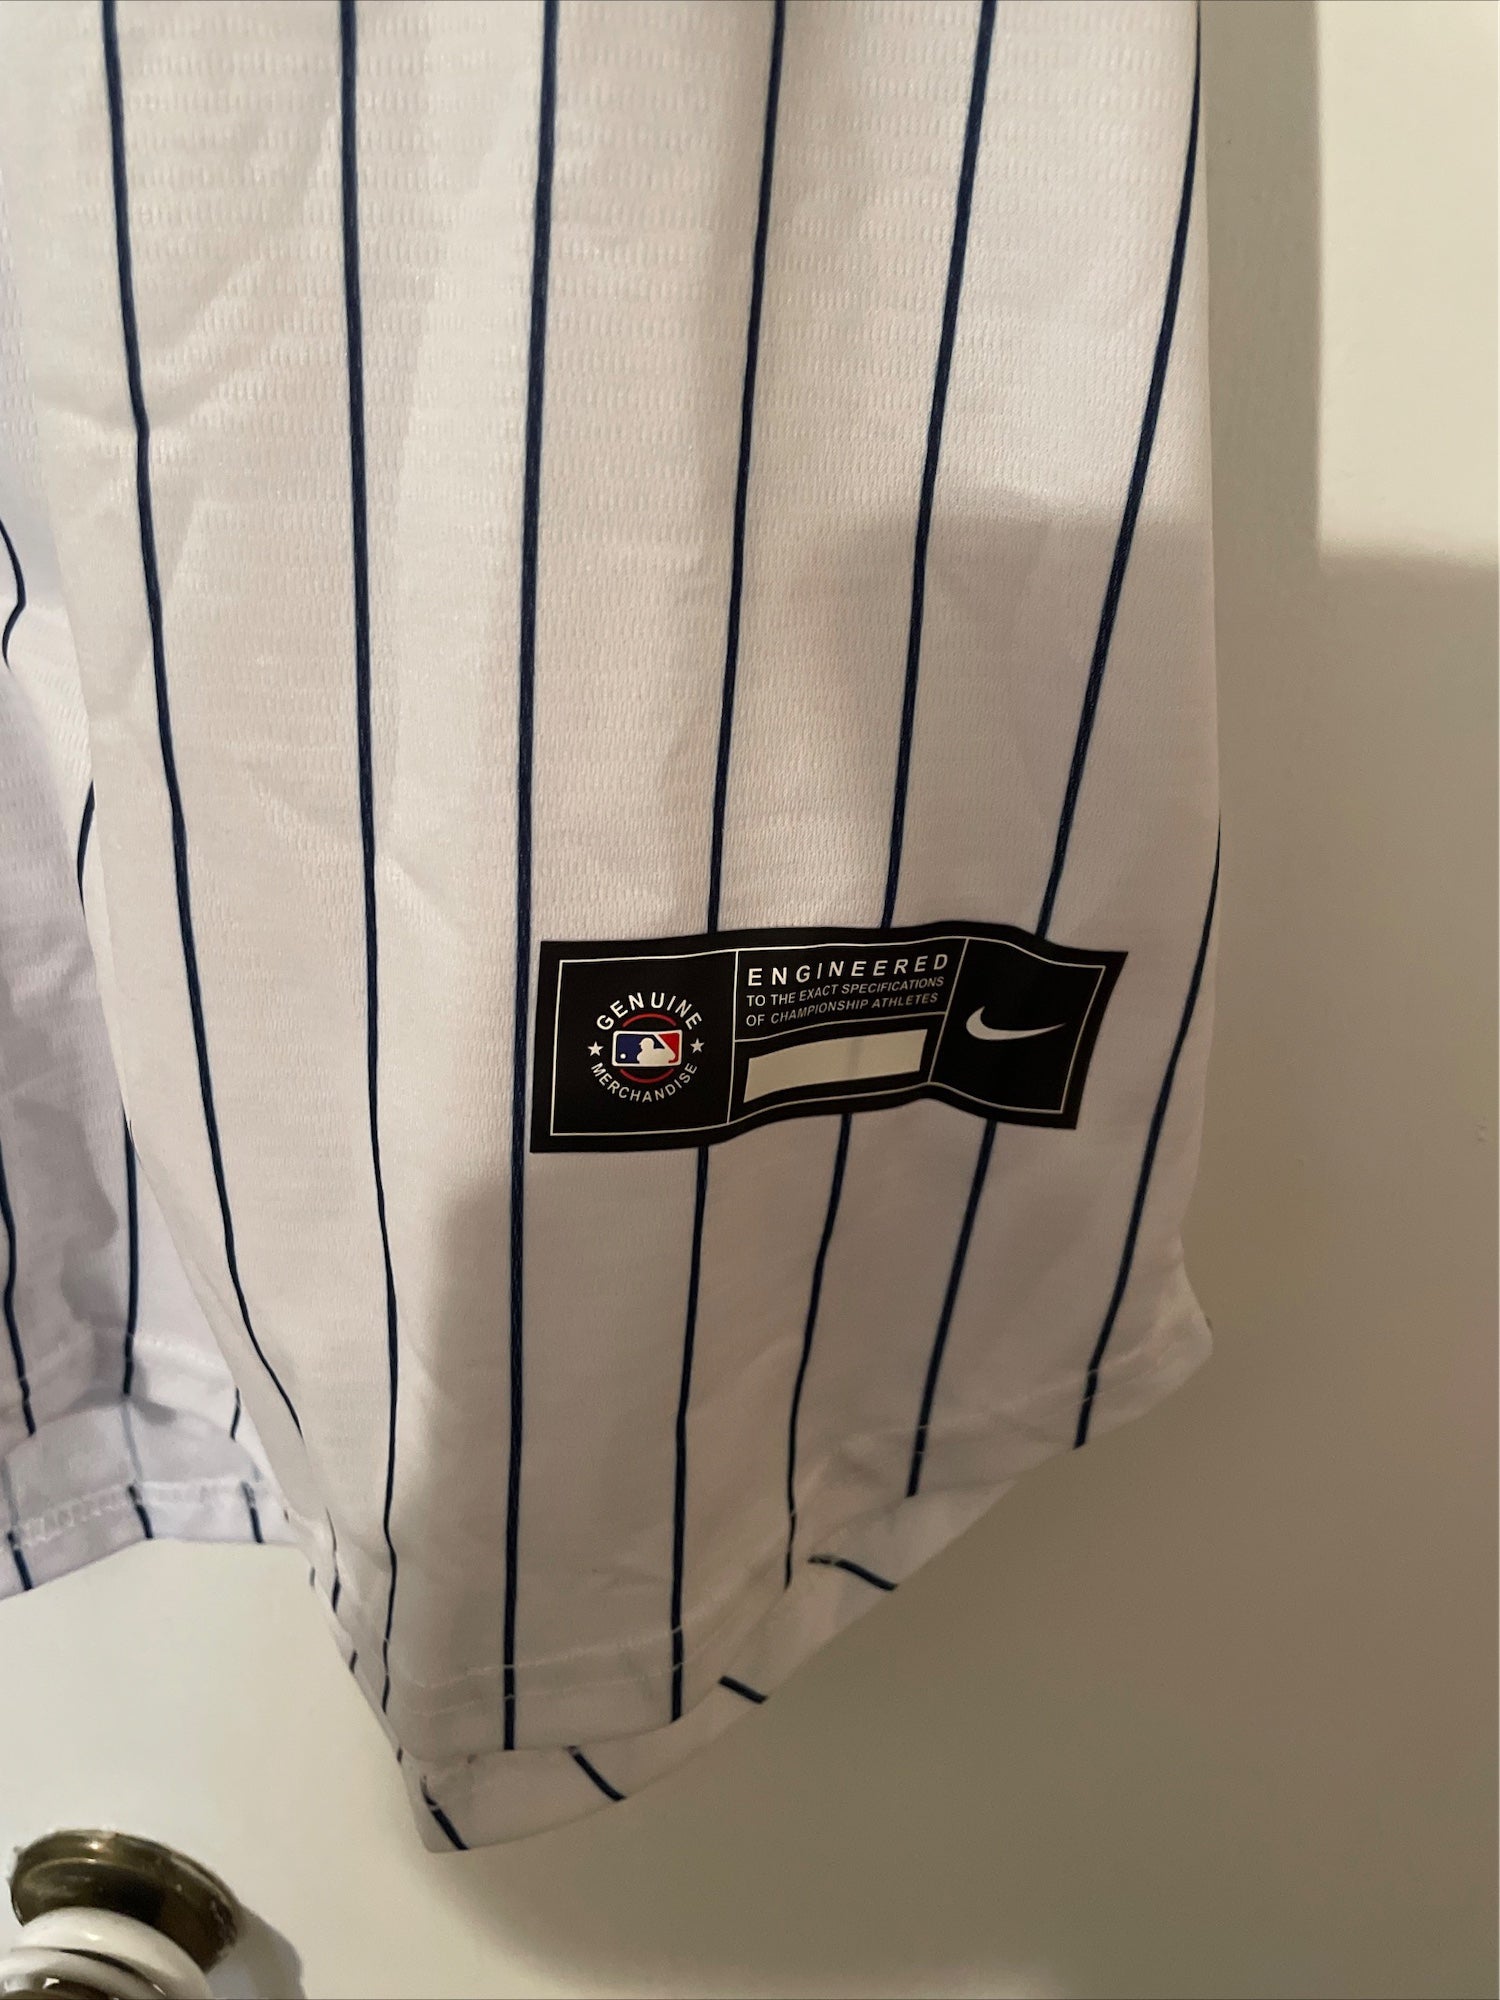 Brand New New York Yankees Aaron Judge Jersey With Tags - Size